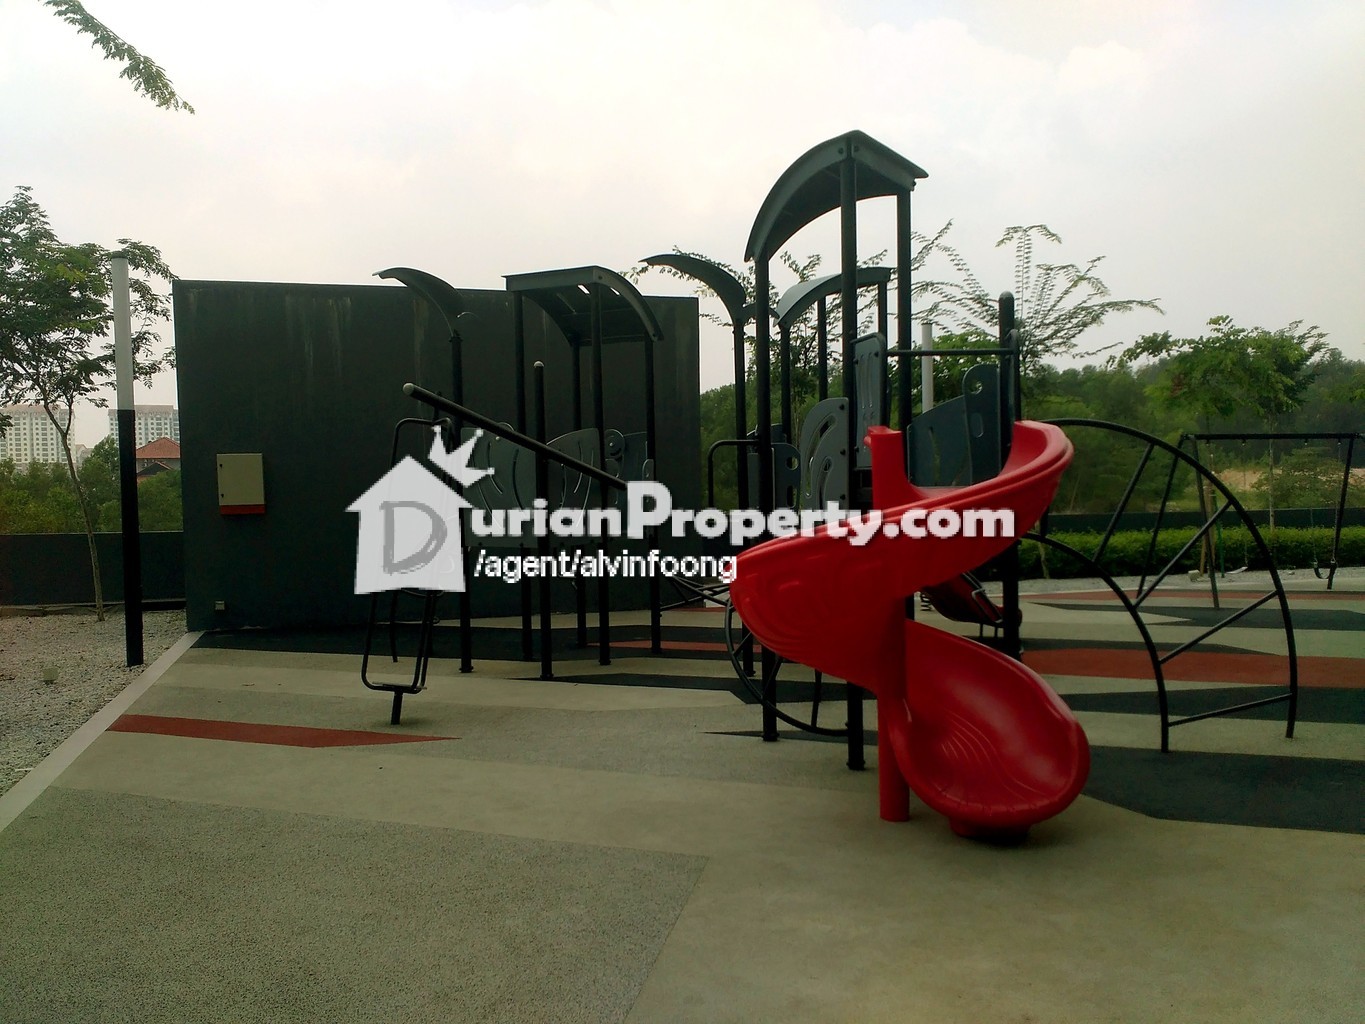 Condo For Rent At Bandar Mahkota Cheras Cheras South For Rm 1 500 By Alvin Foong Durianproperty